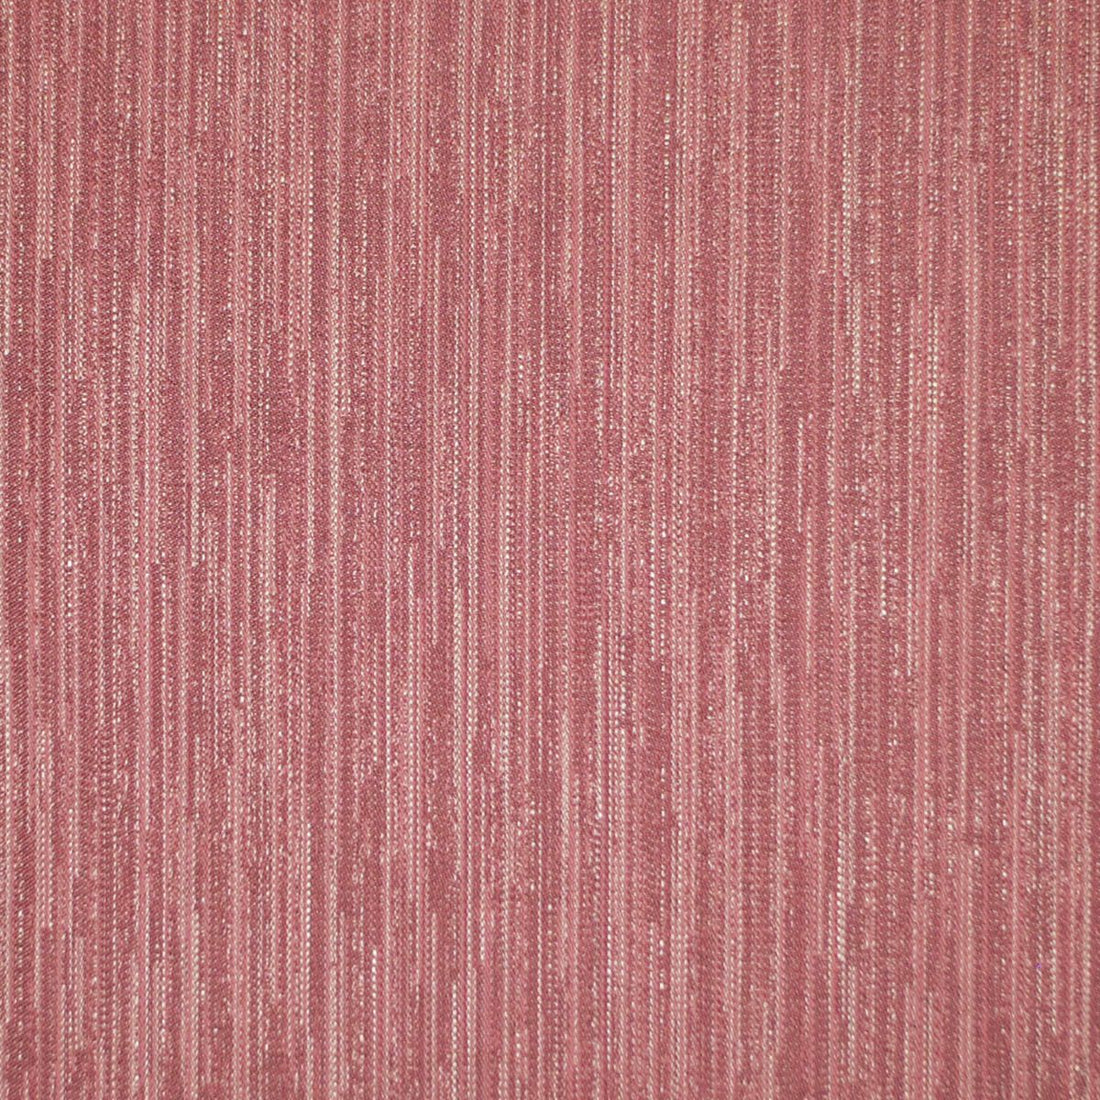 Ligonier fabric in mulberry color - pattern number M8 00059879 - by Scalamandre in the Old World Weavers collection